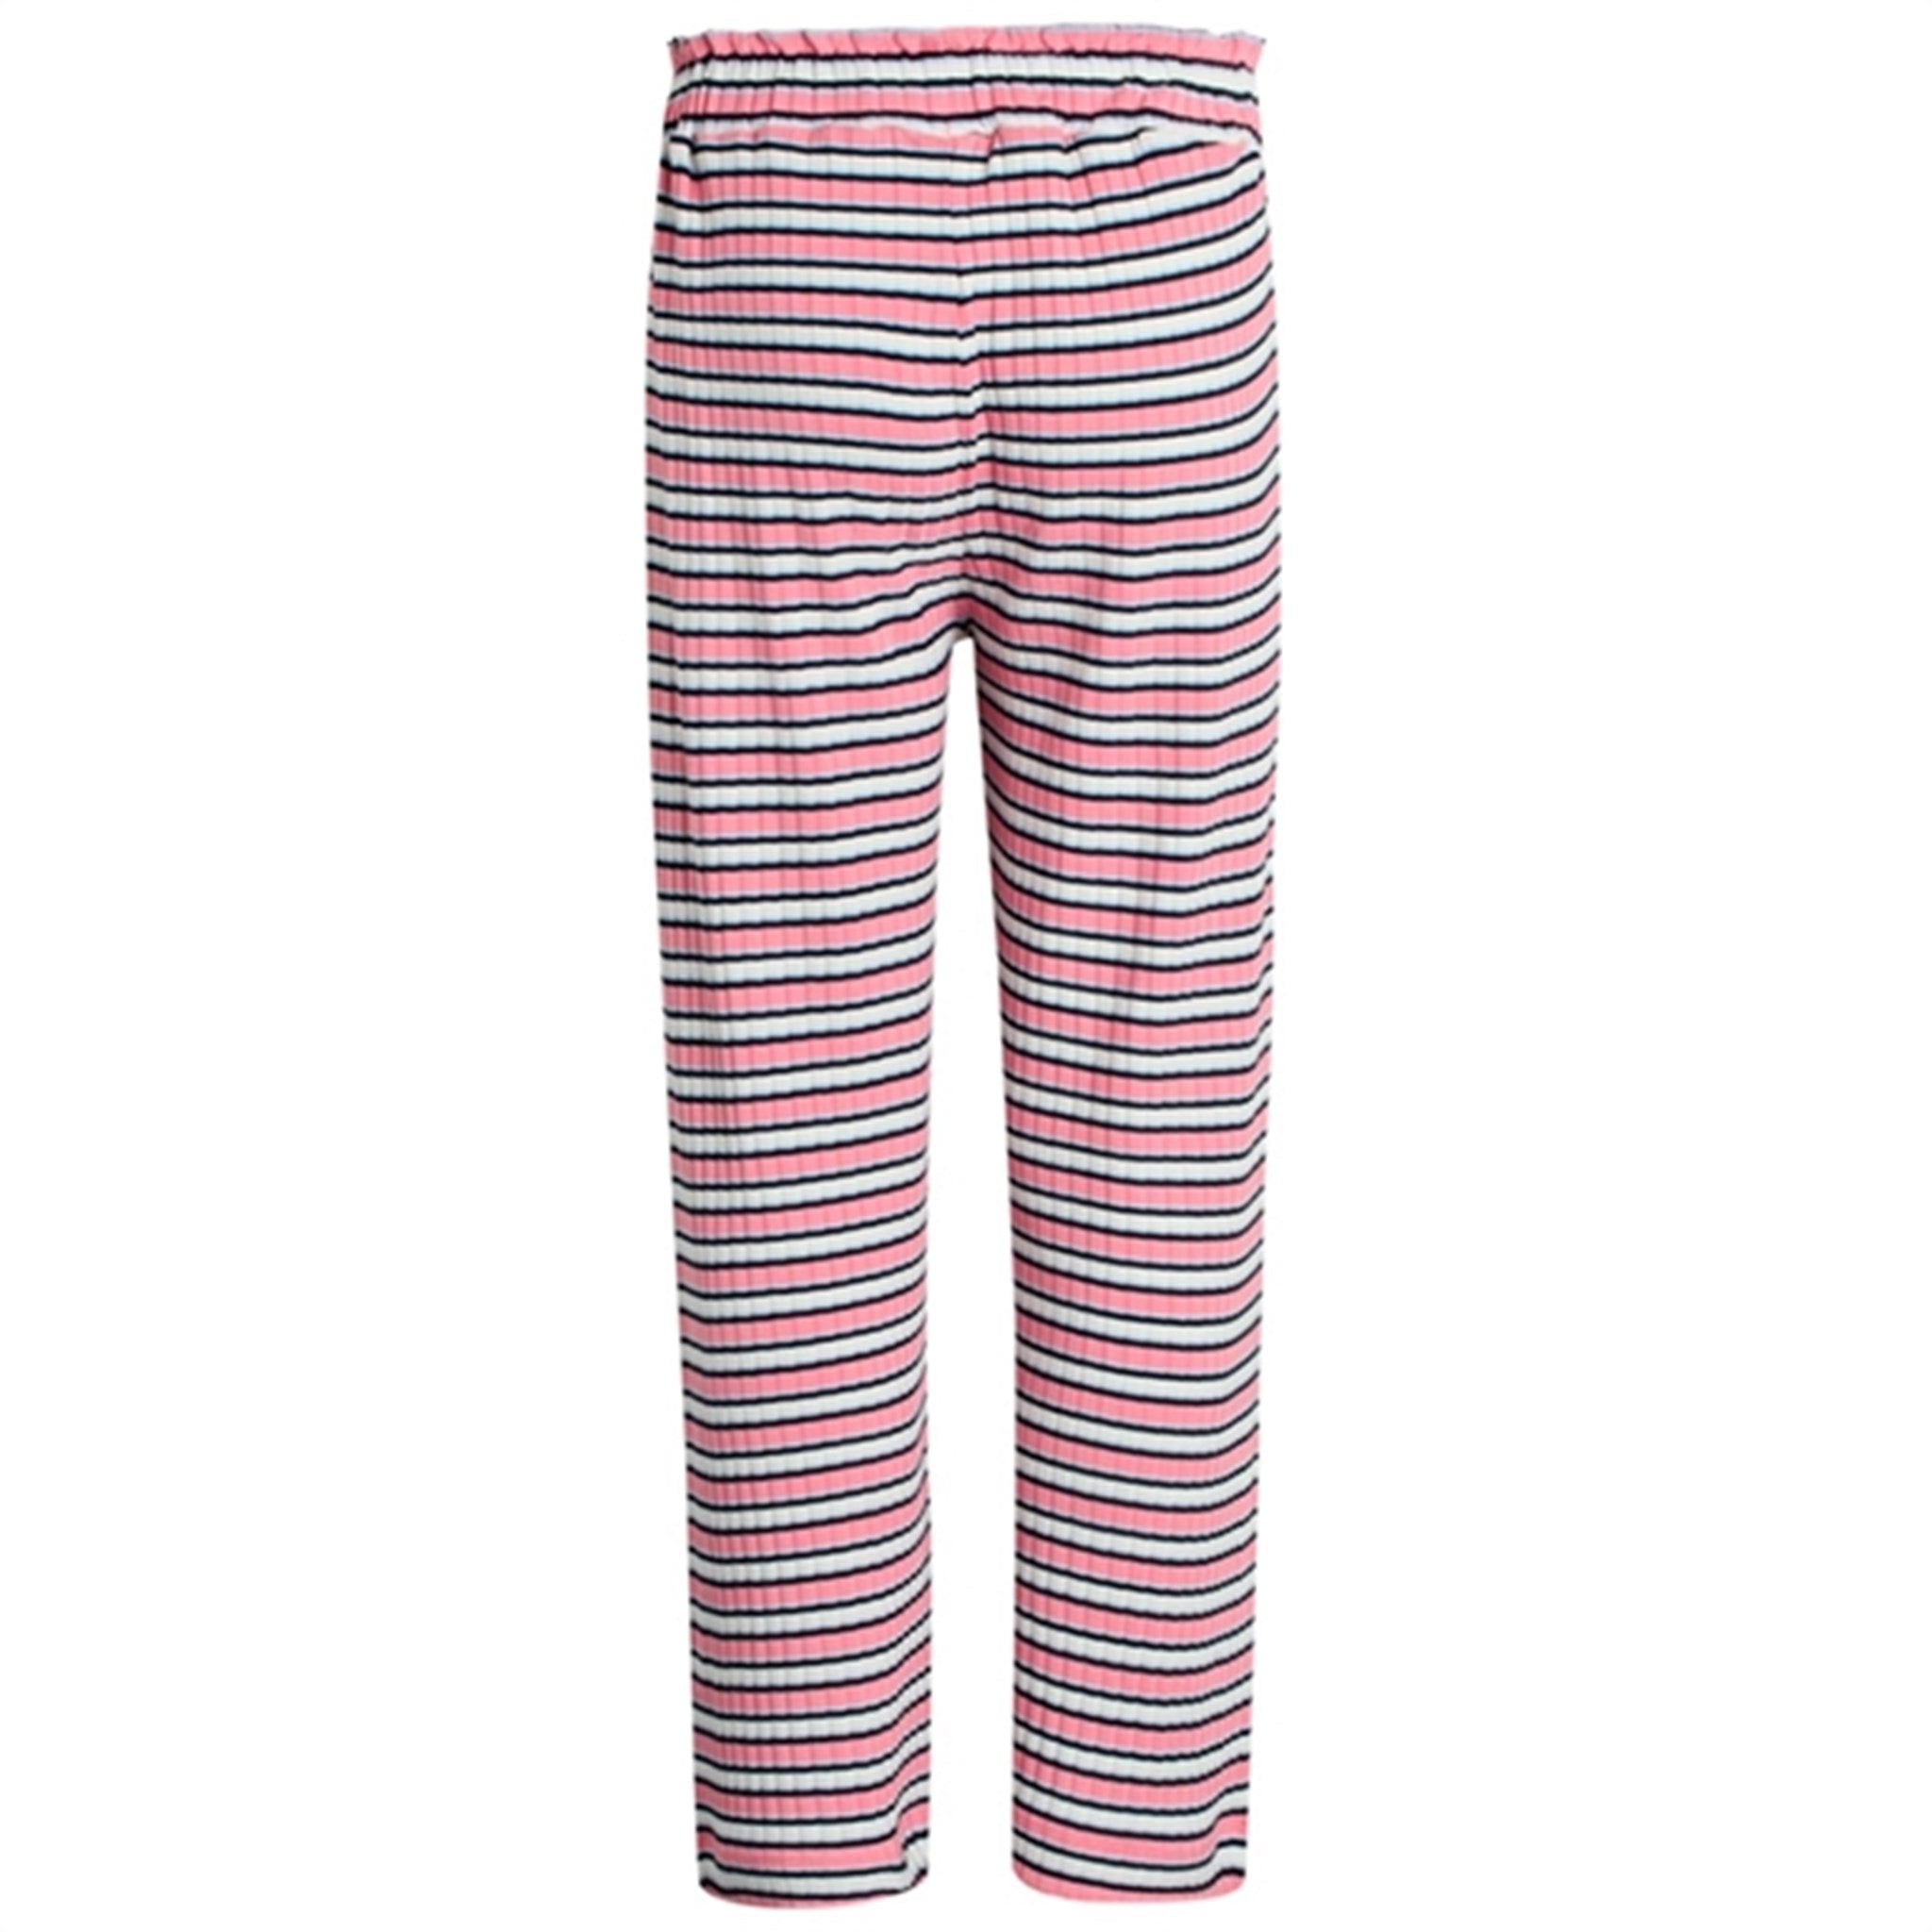 Mads Nørgaard 5x5 Stripe Papina Pants Multi Strawberry Pink 2